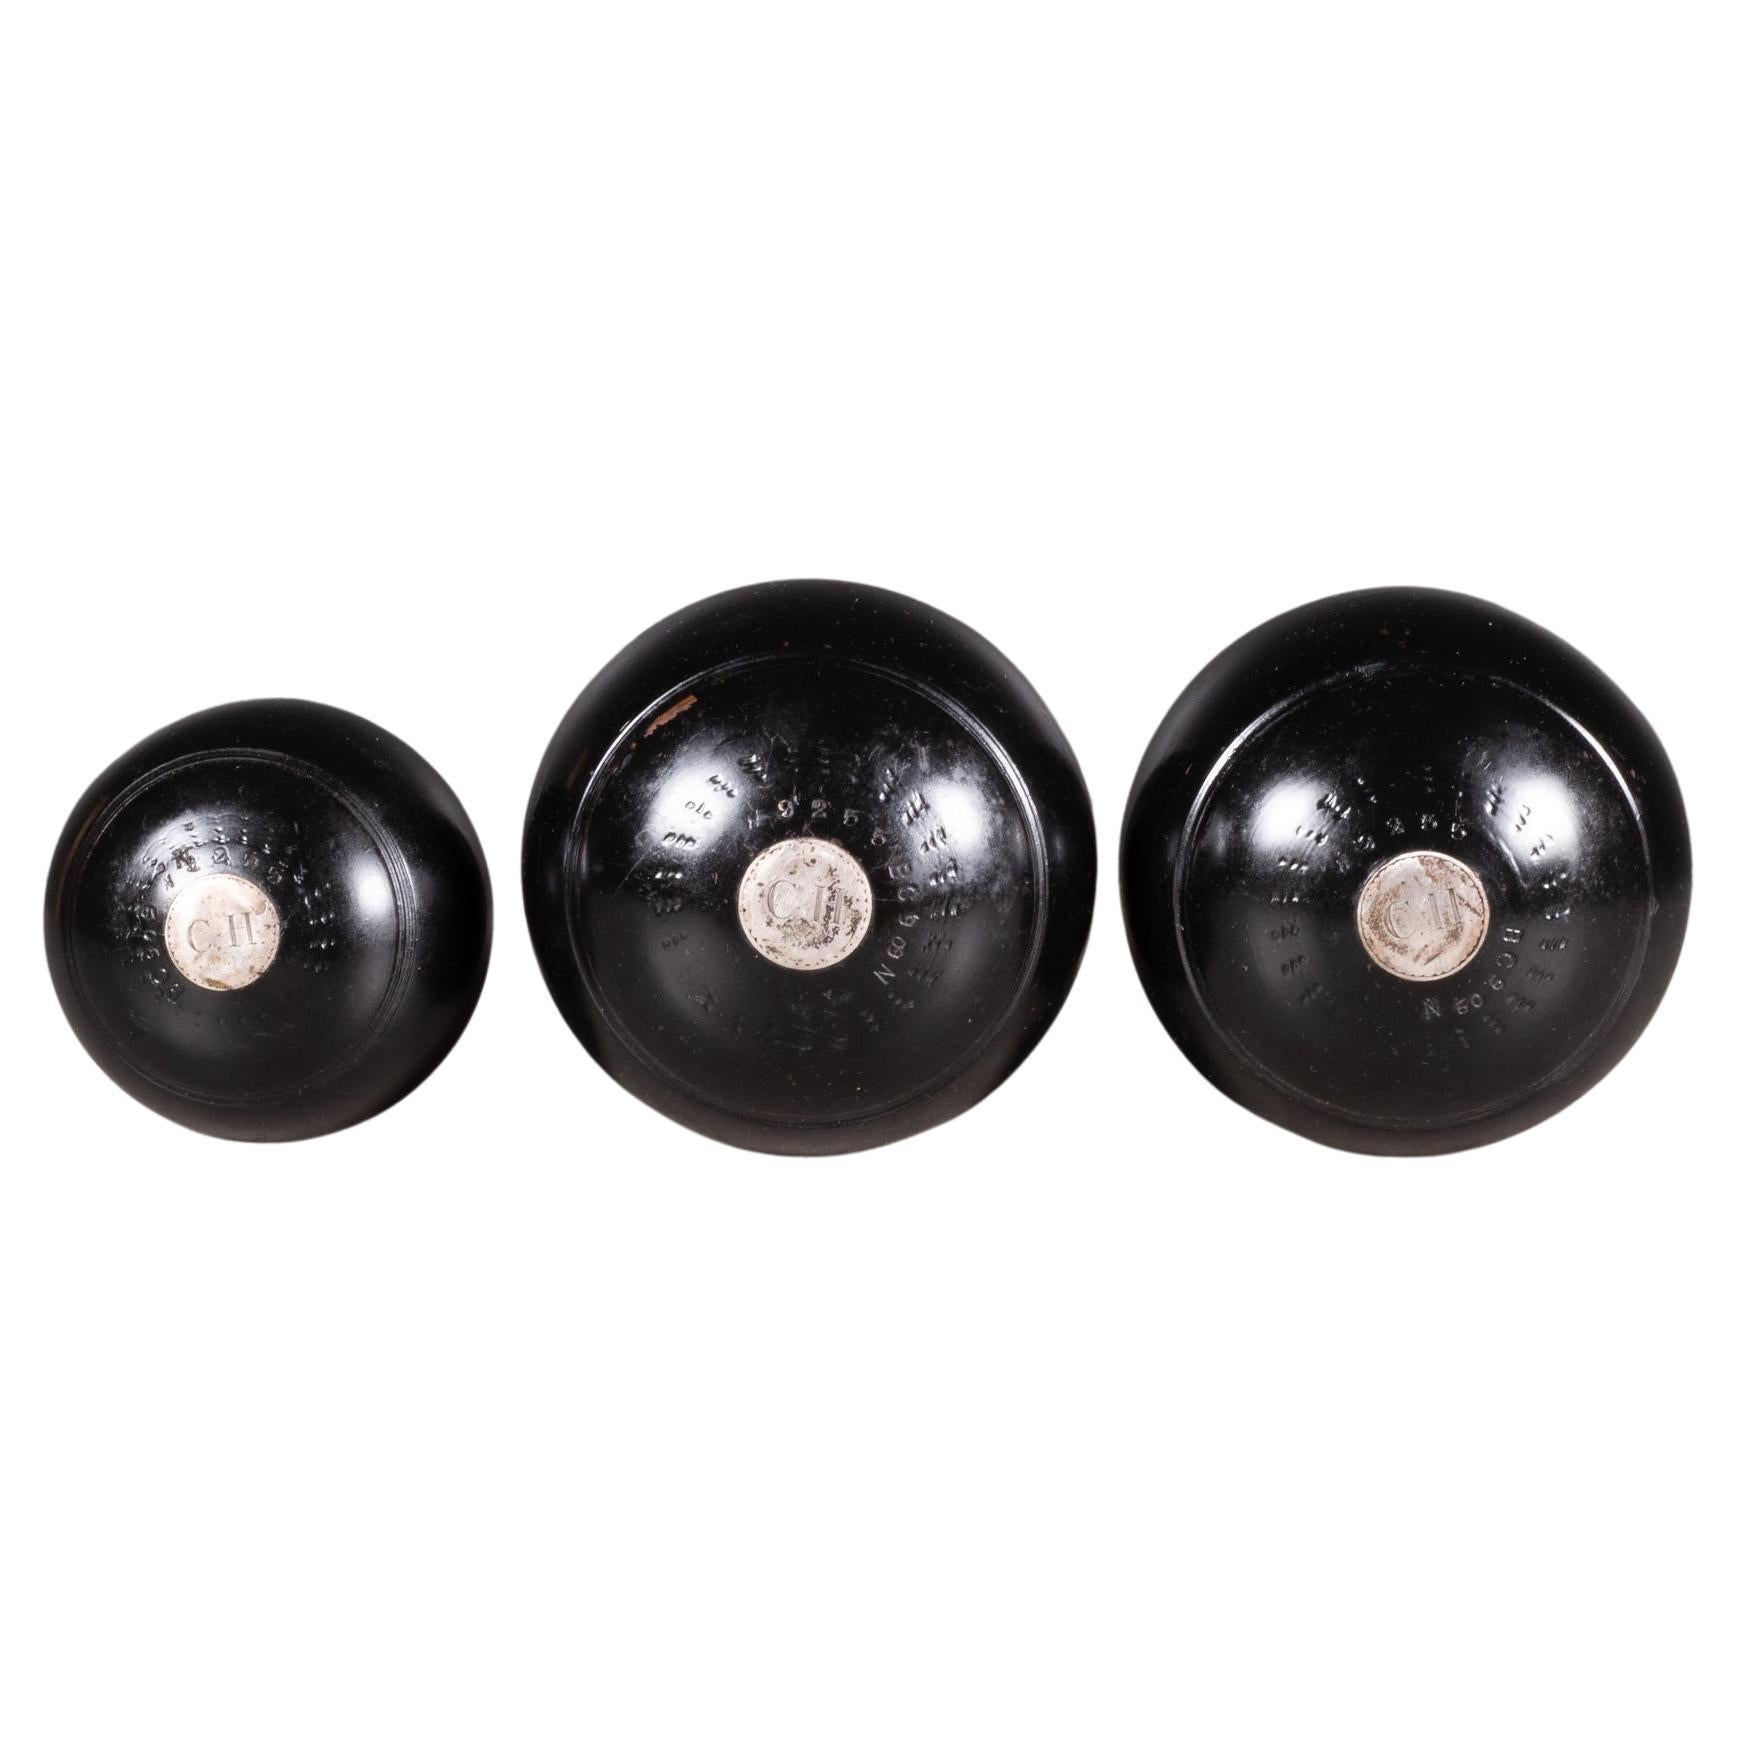 Antique Monogrammed Sterling Silver Inlaid English Lawn Balls c.1900 (FREE SHIP) For Sale